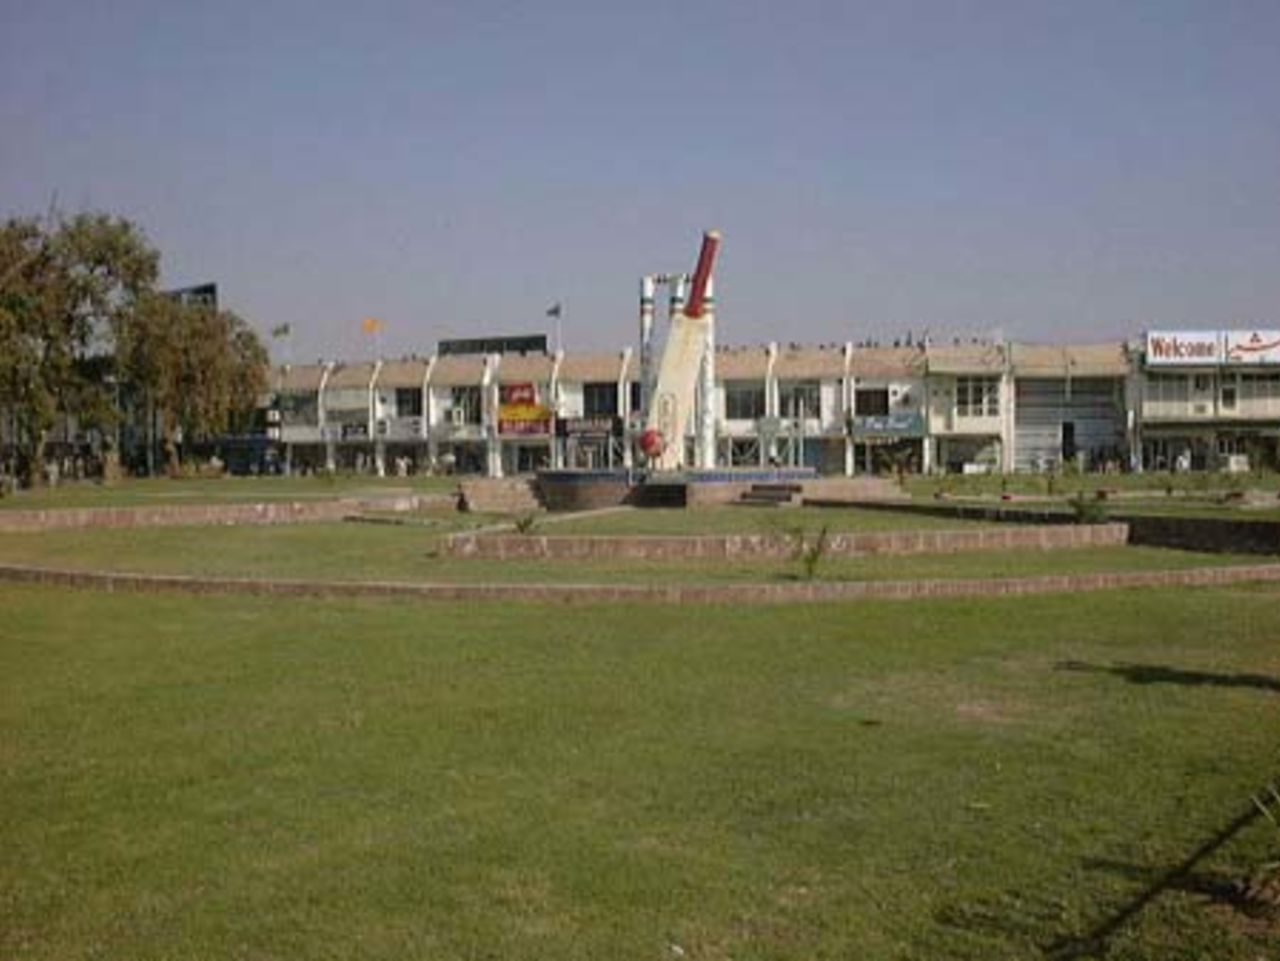 A view of the front of Iqbal Stadium, Faisalabad, 2nd Test England v Pakistan, 29 Nov-3 Dec 2000